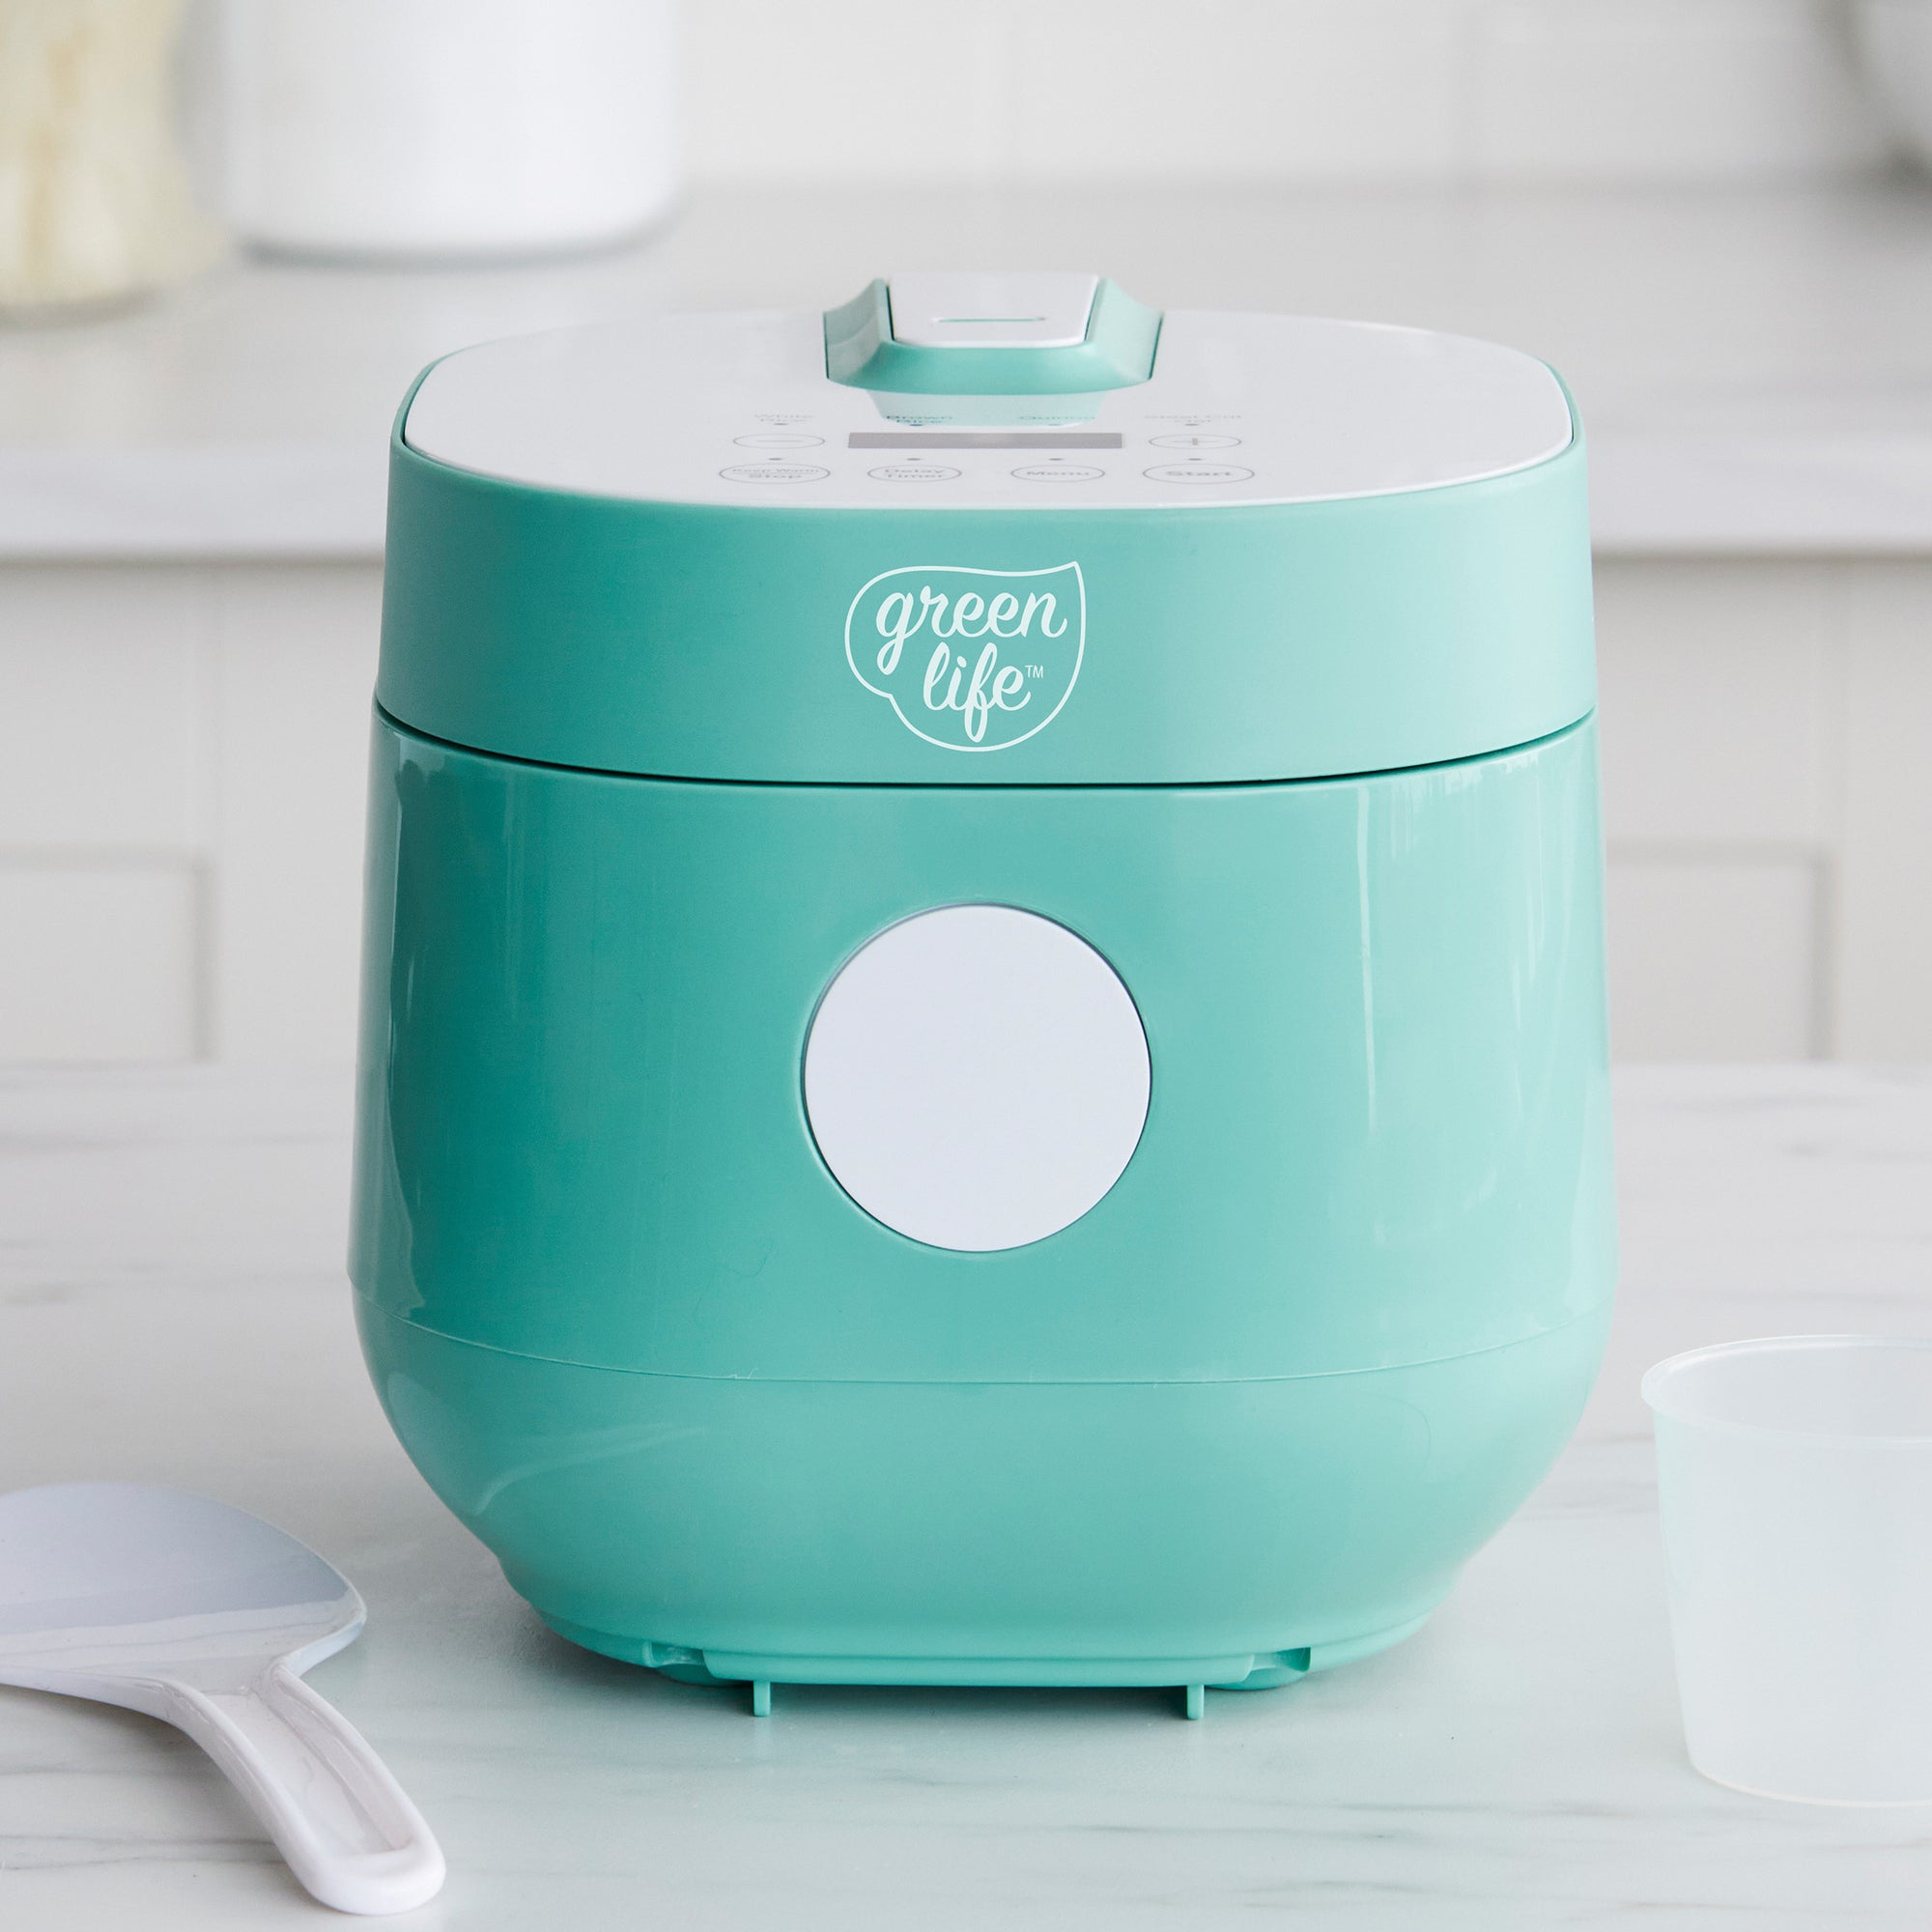 green life rice and bean maker｜TikTok Search